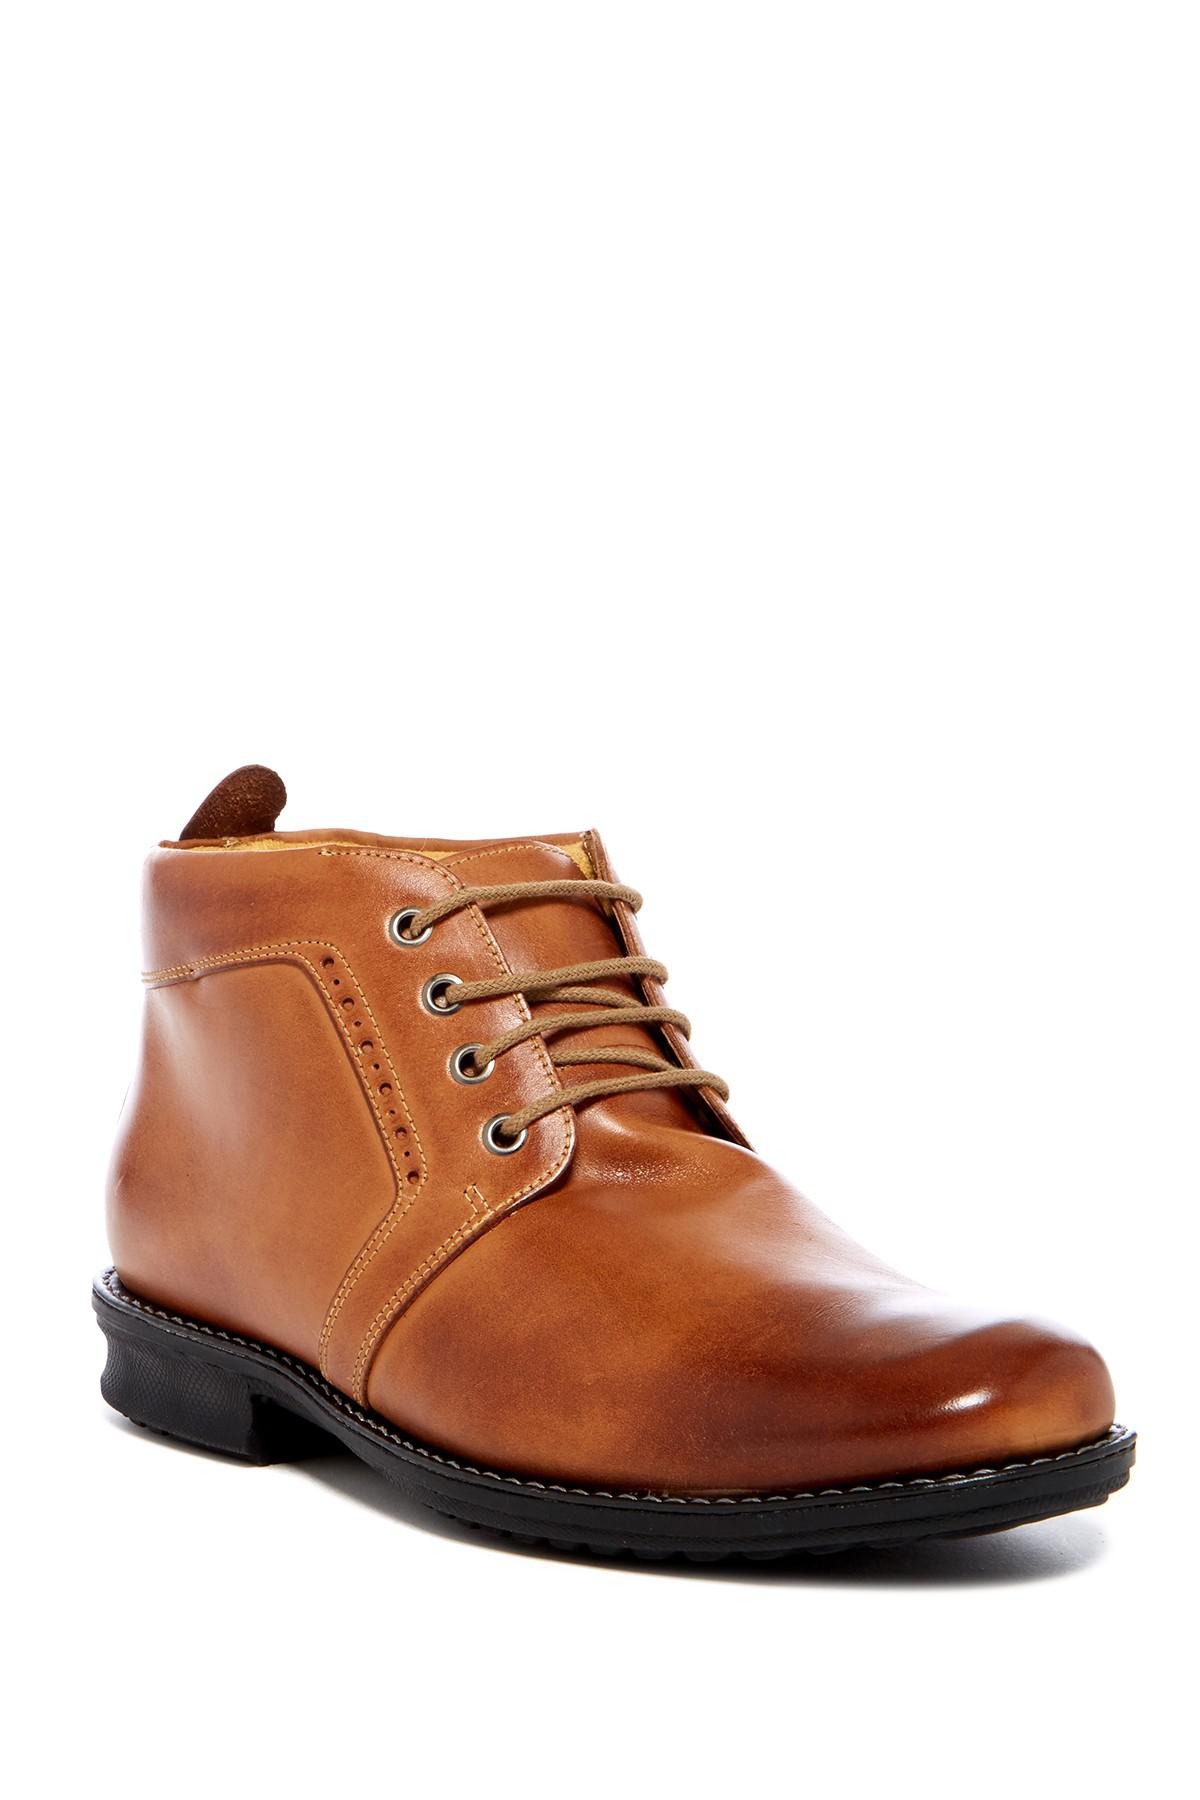 Sandro Moscoloni Leather Terry Chukka Boot - Wide Width Available in ...